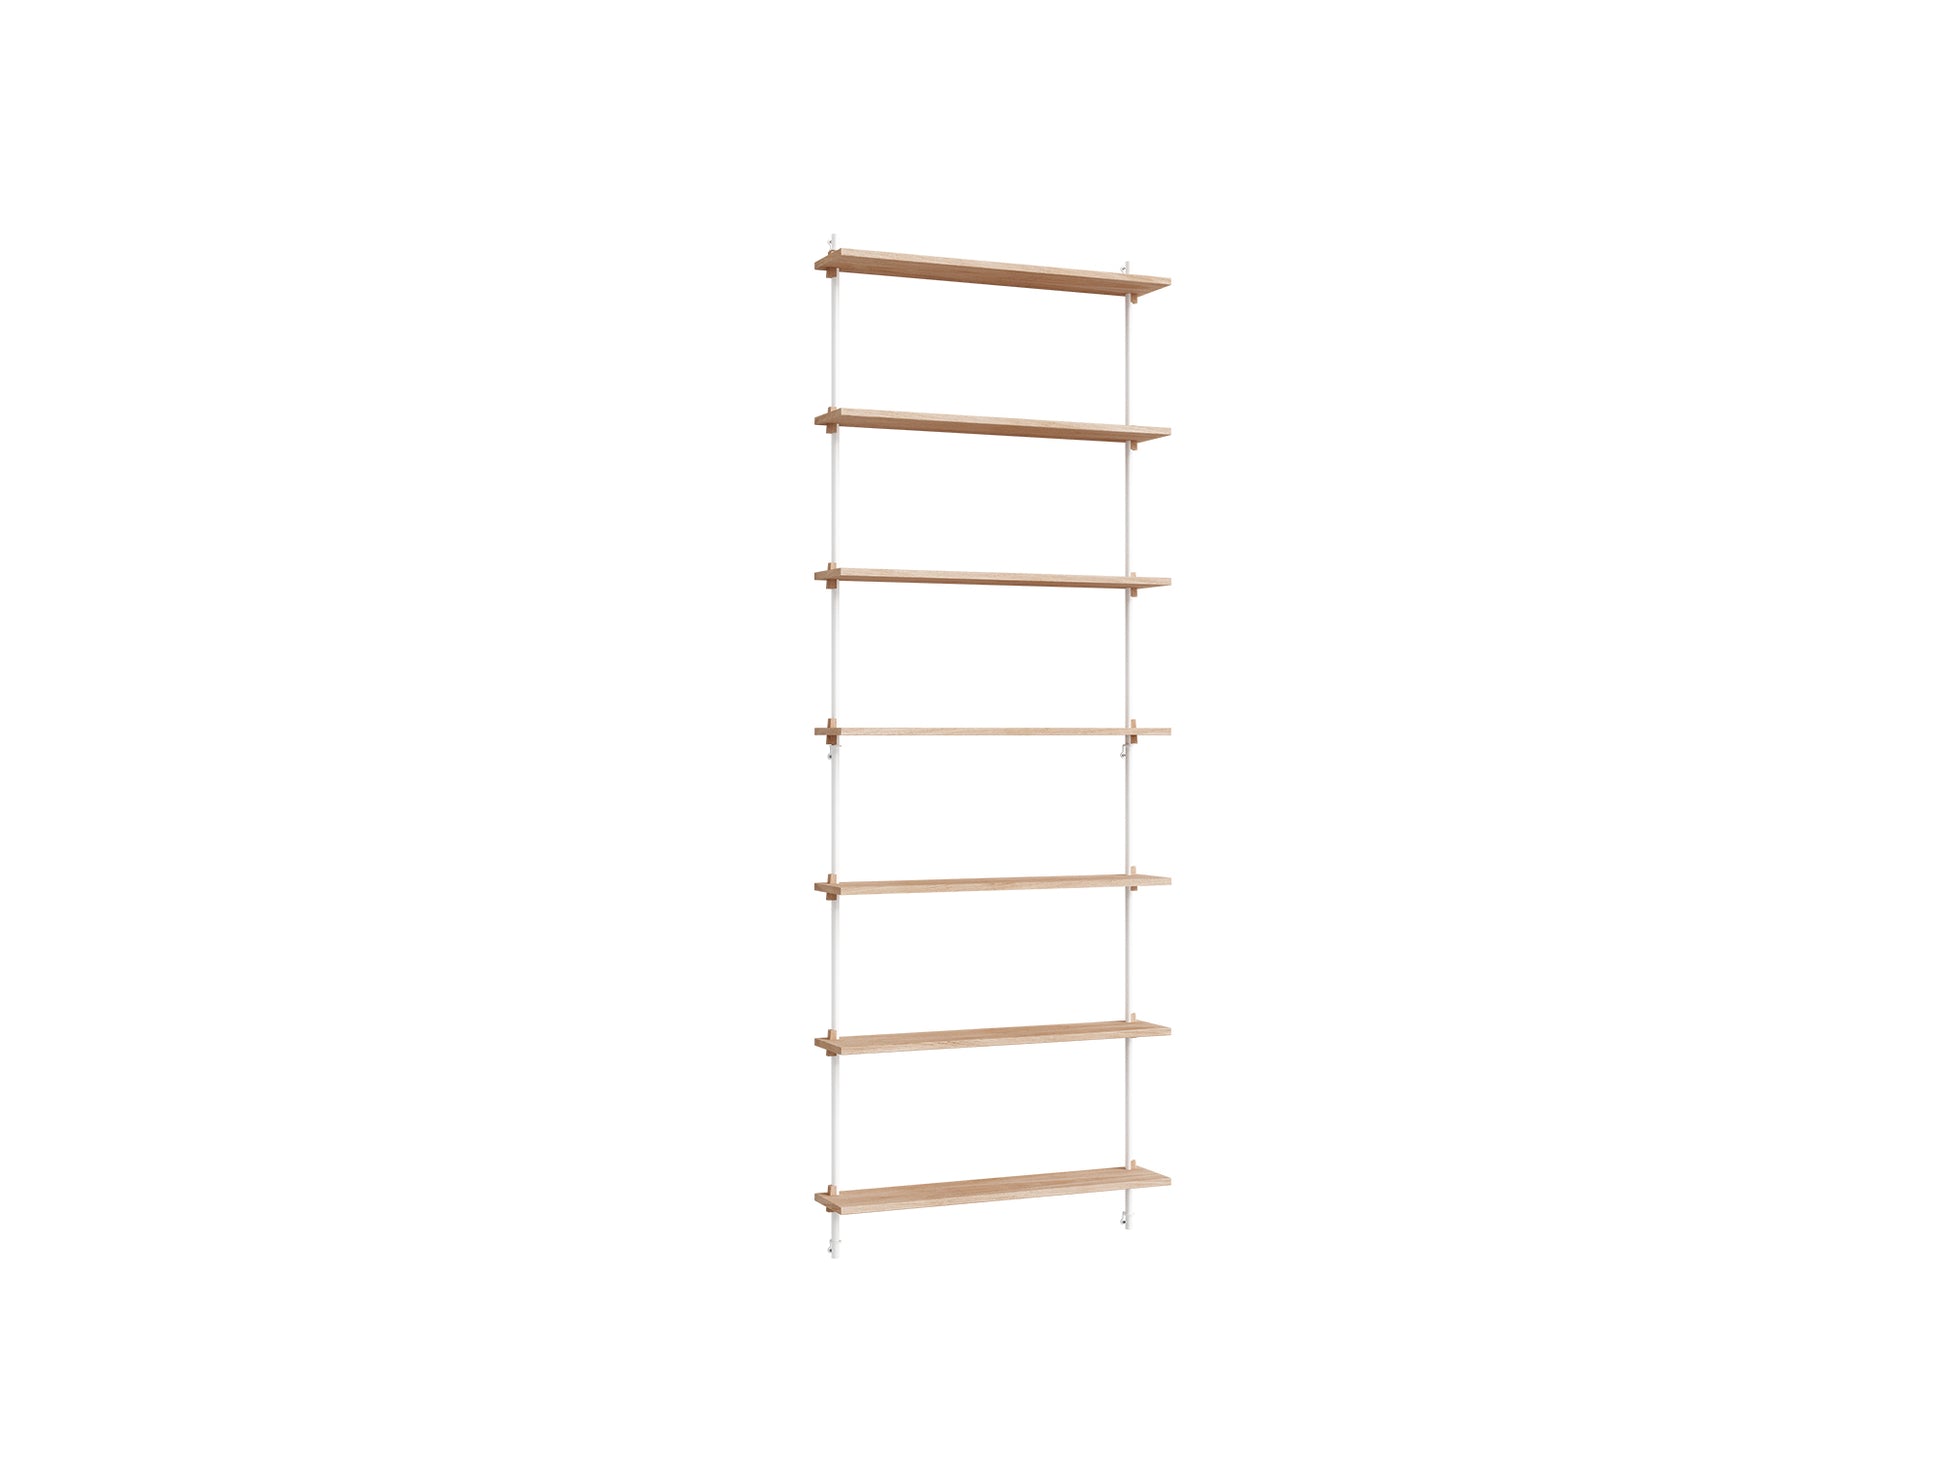 Wall Shelving System Sets (230 cm) by Moebe - WS.230.1. / White Uprights / Oiled Oak